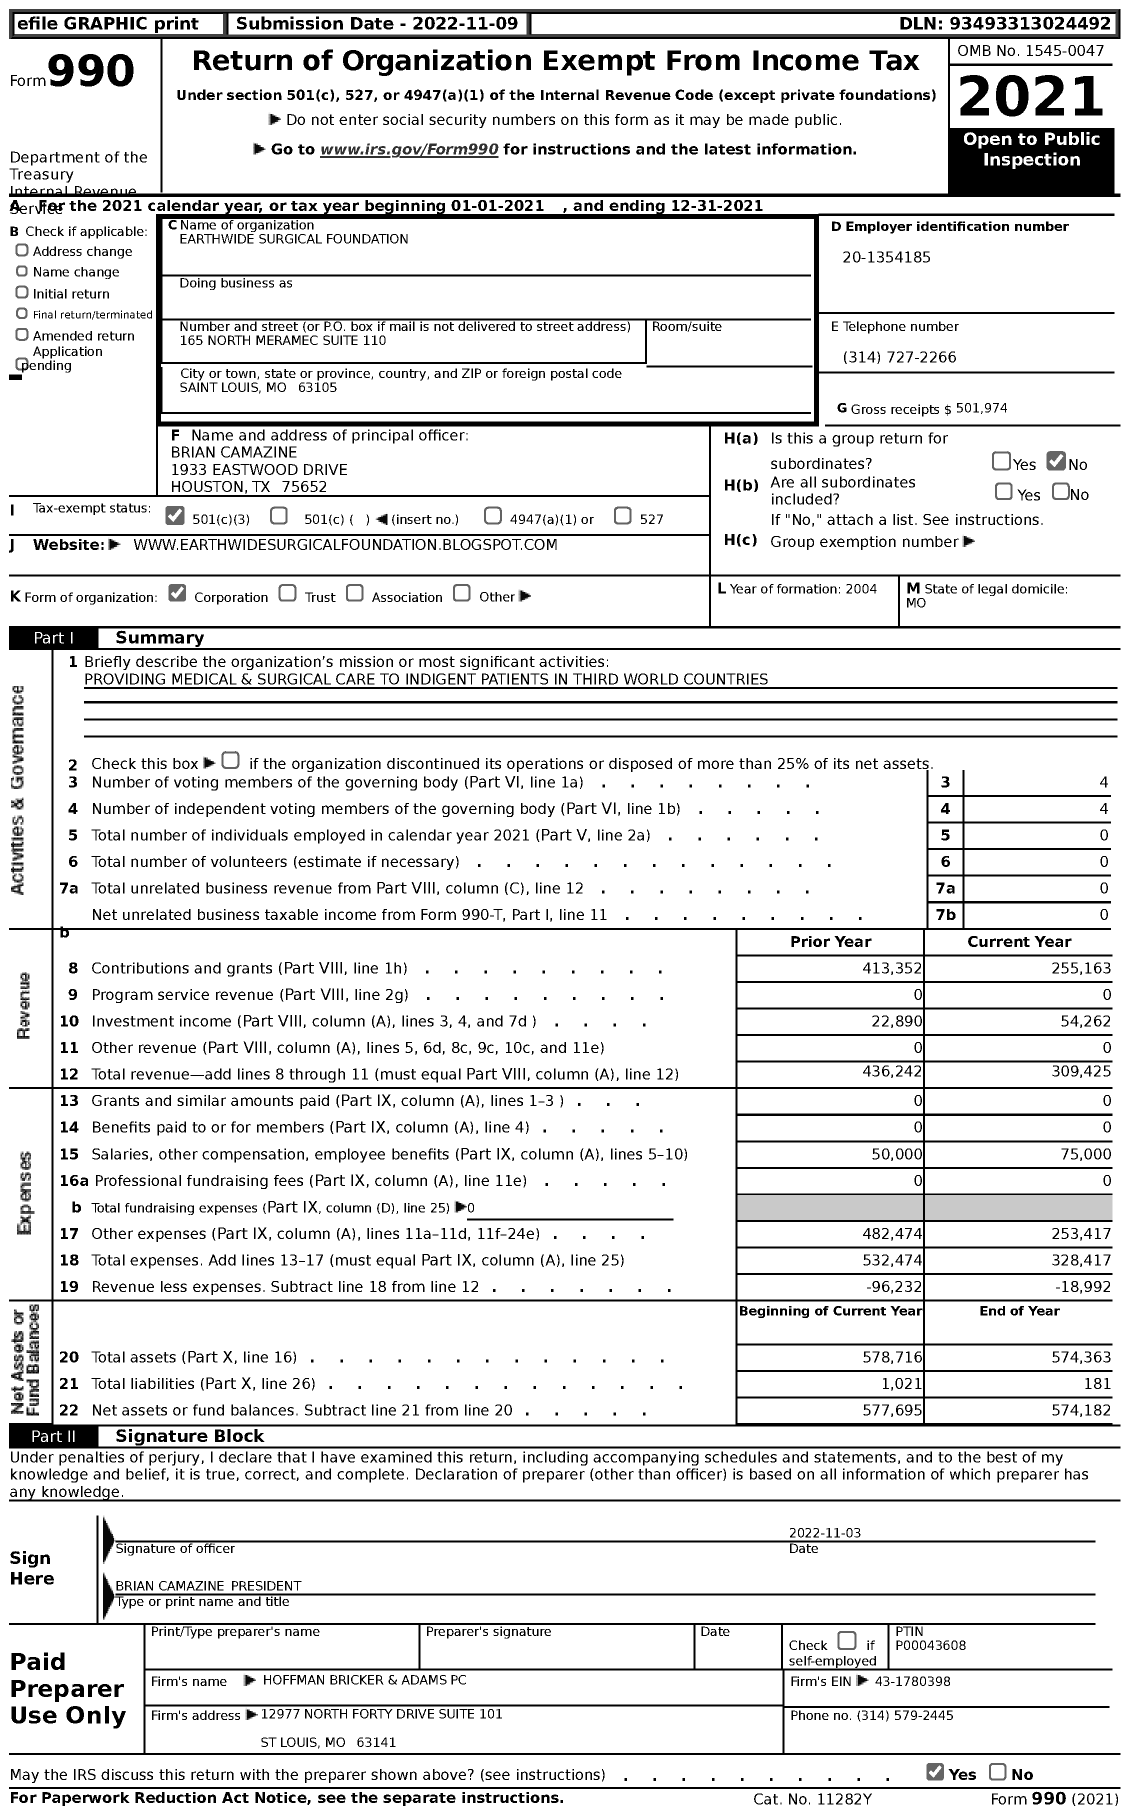 Image of first page of 2021 Form 990 for Earthwide Surgical Foundation